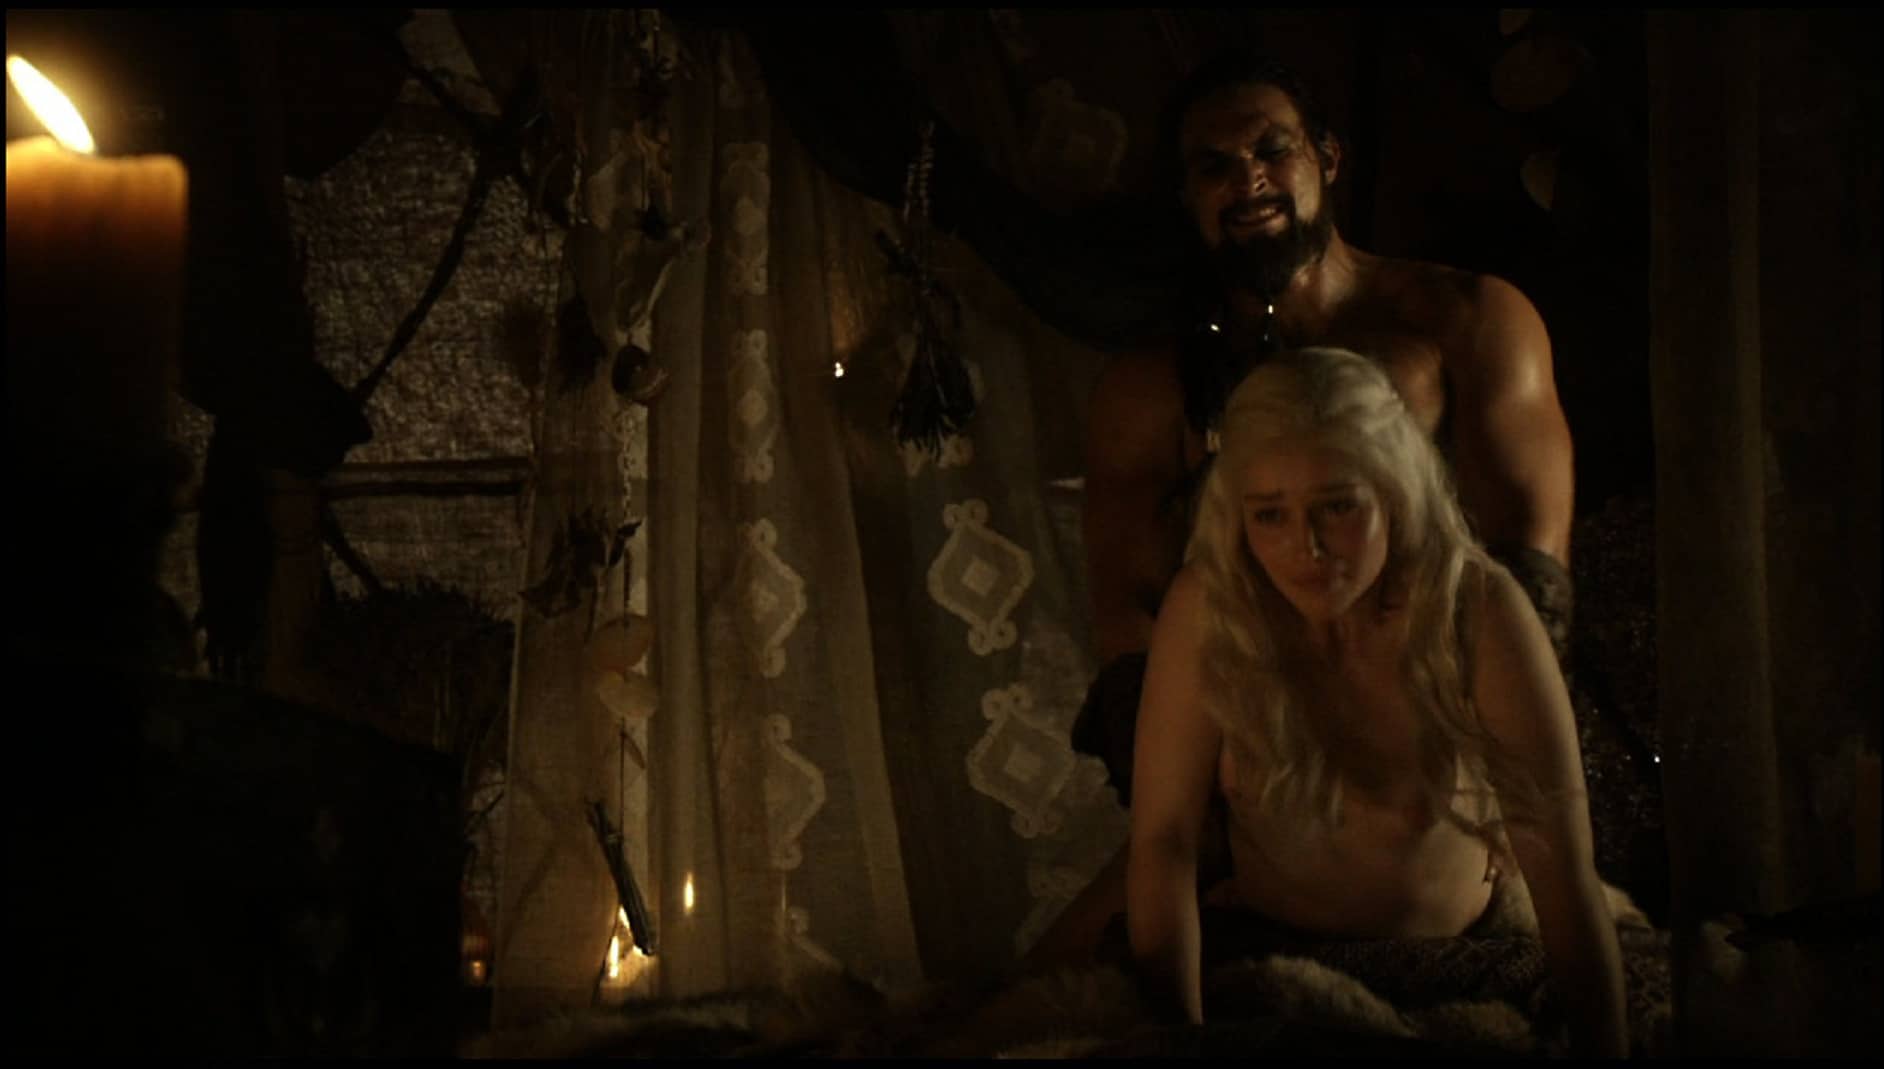 Emilia Clarke getting it from behind topless